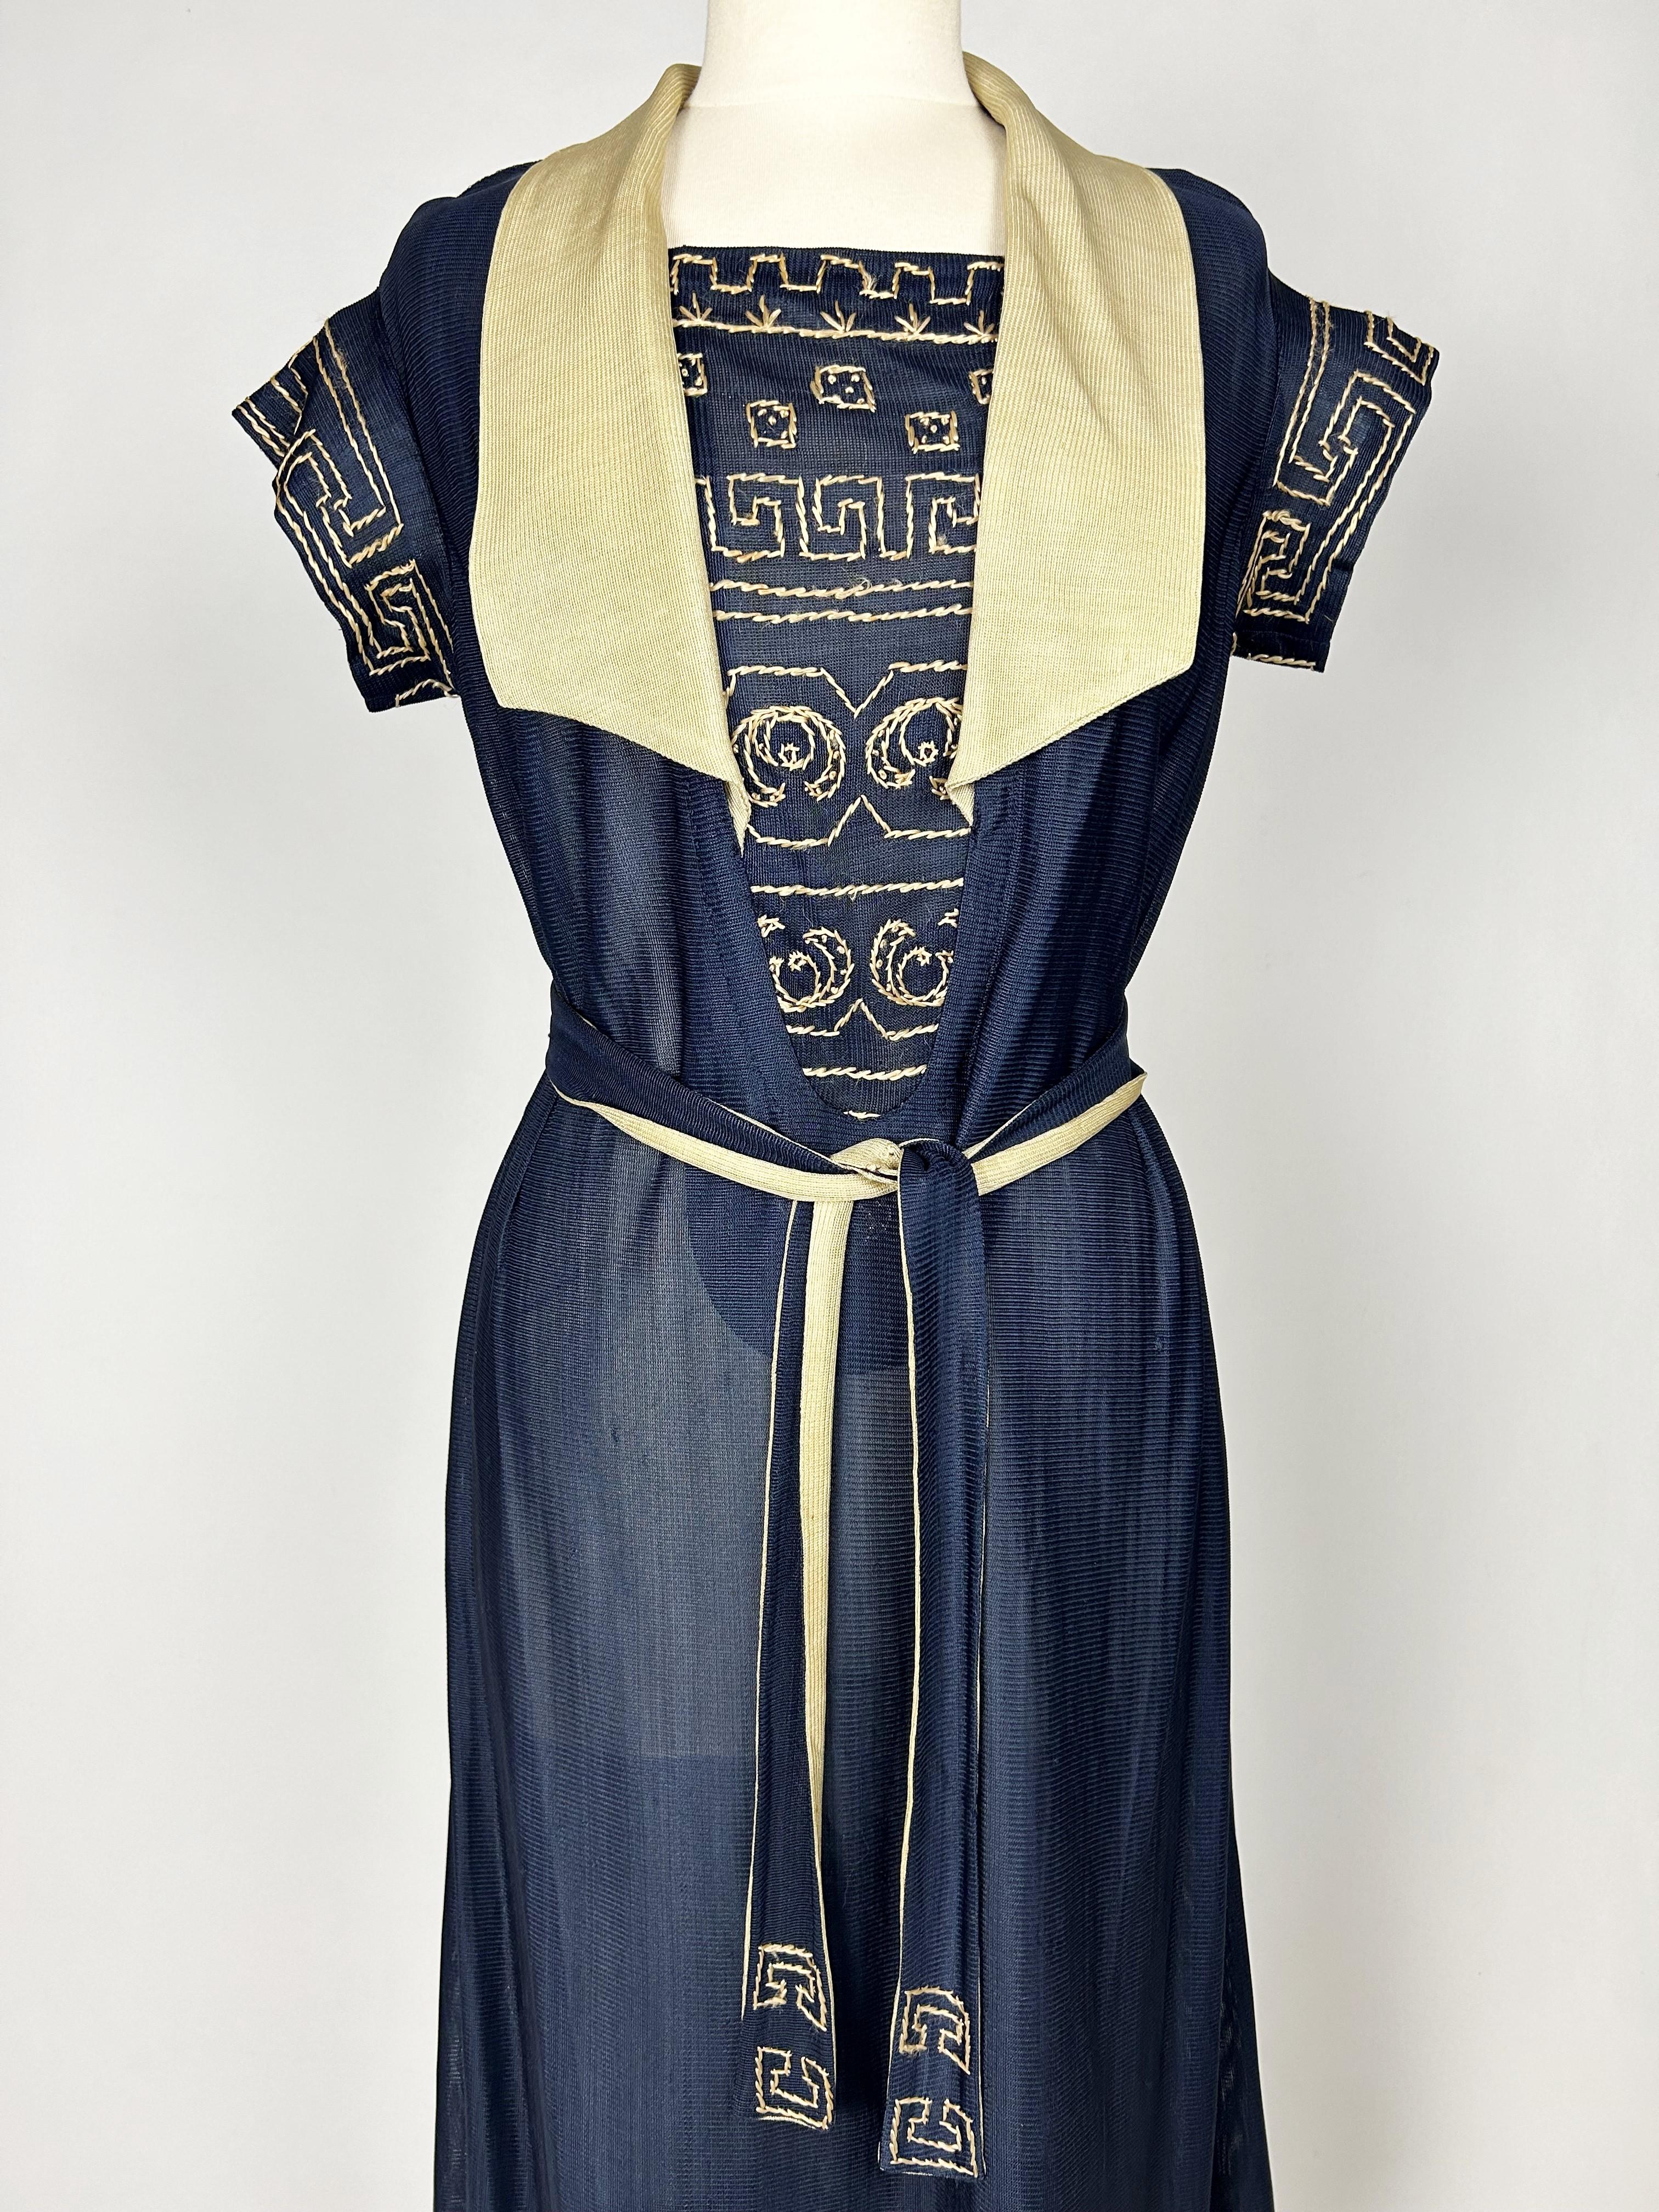 CC embroidered jersey knit silk Dress in the style of Coco Chanel France C. 1920 For Sale 3